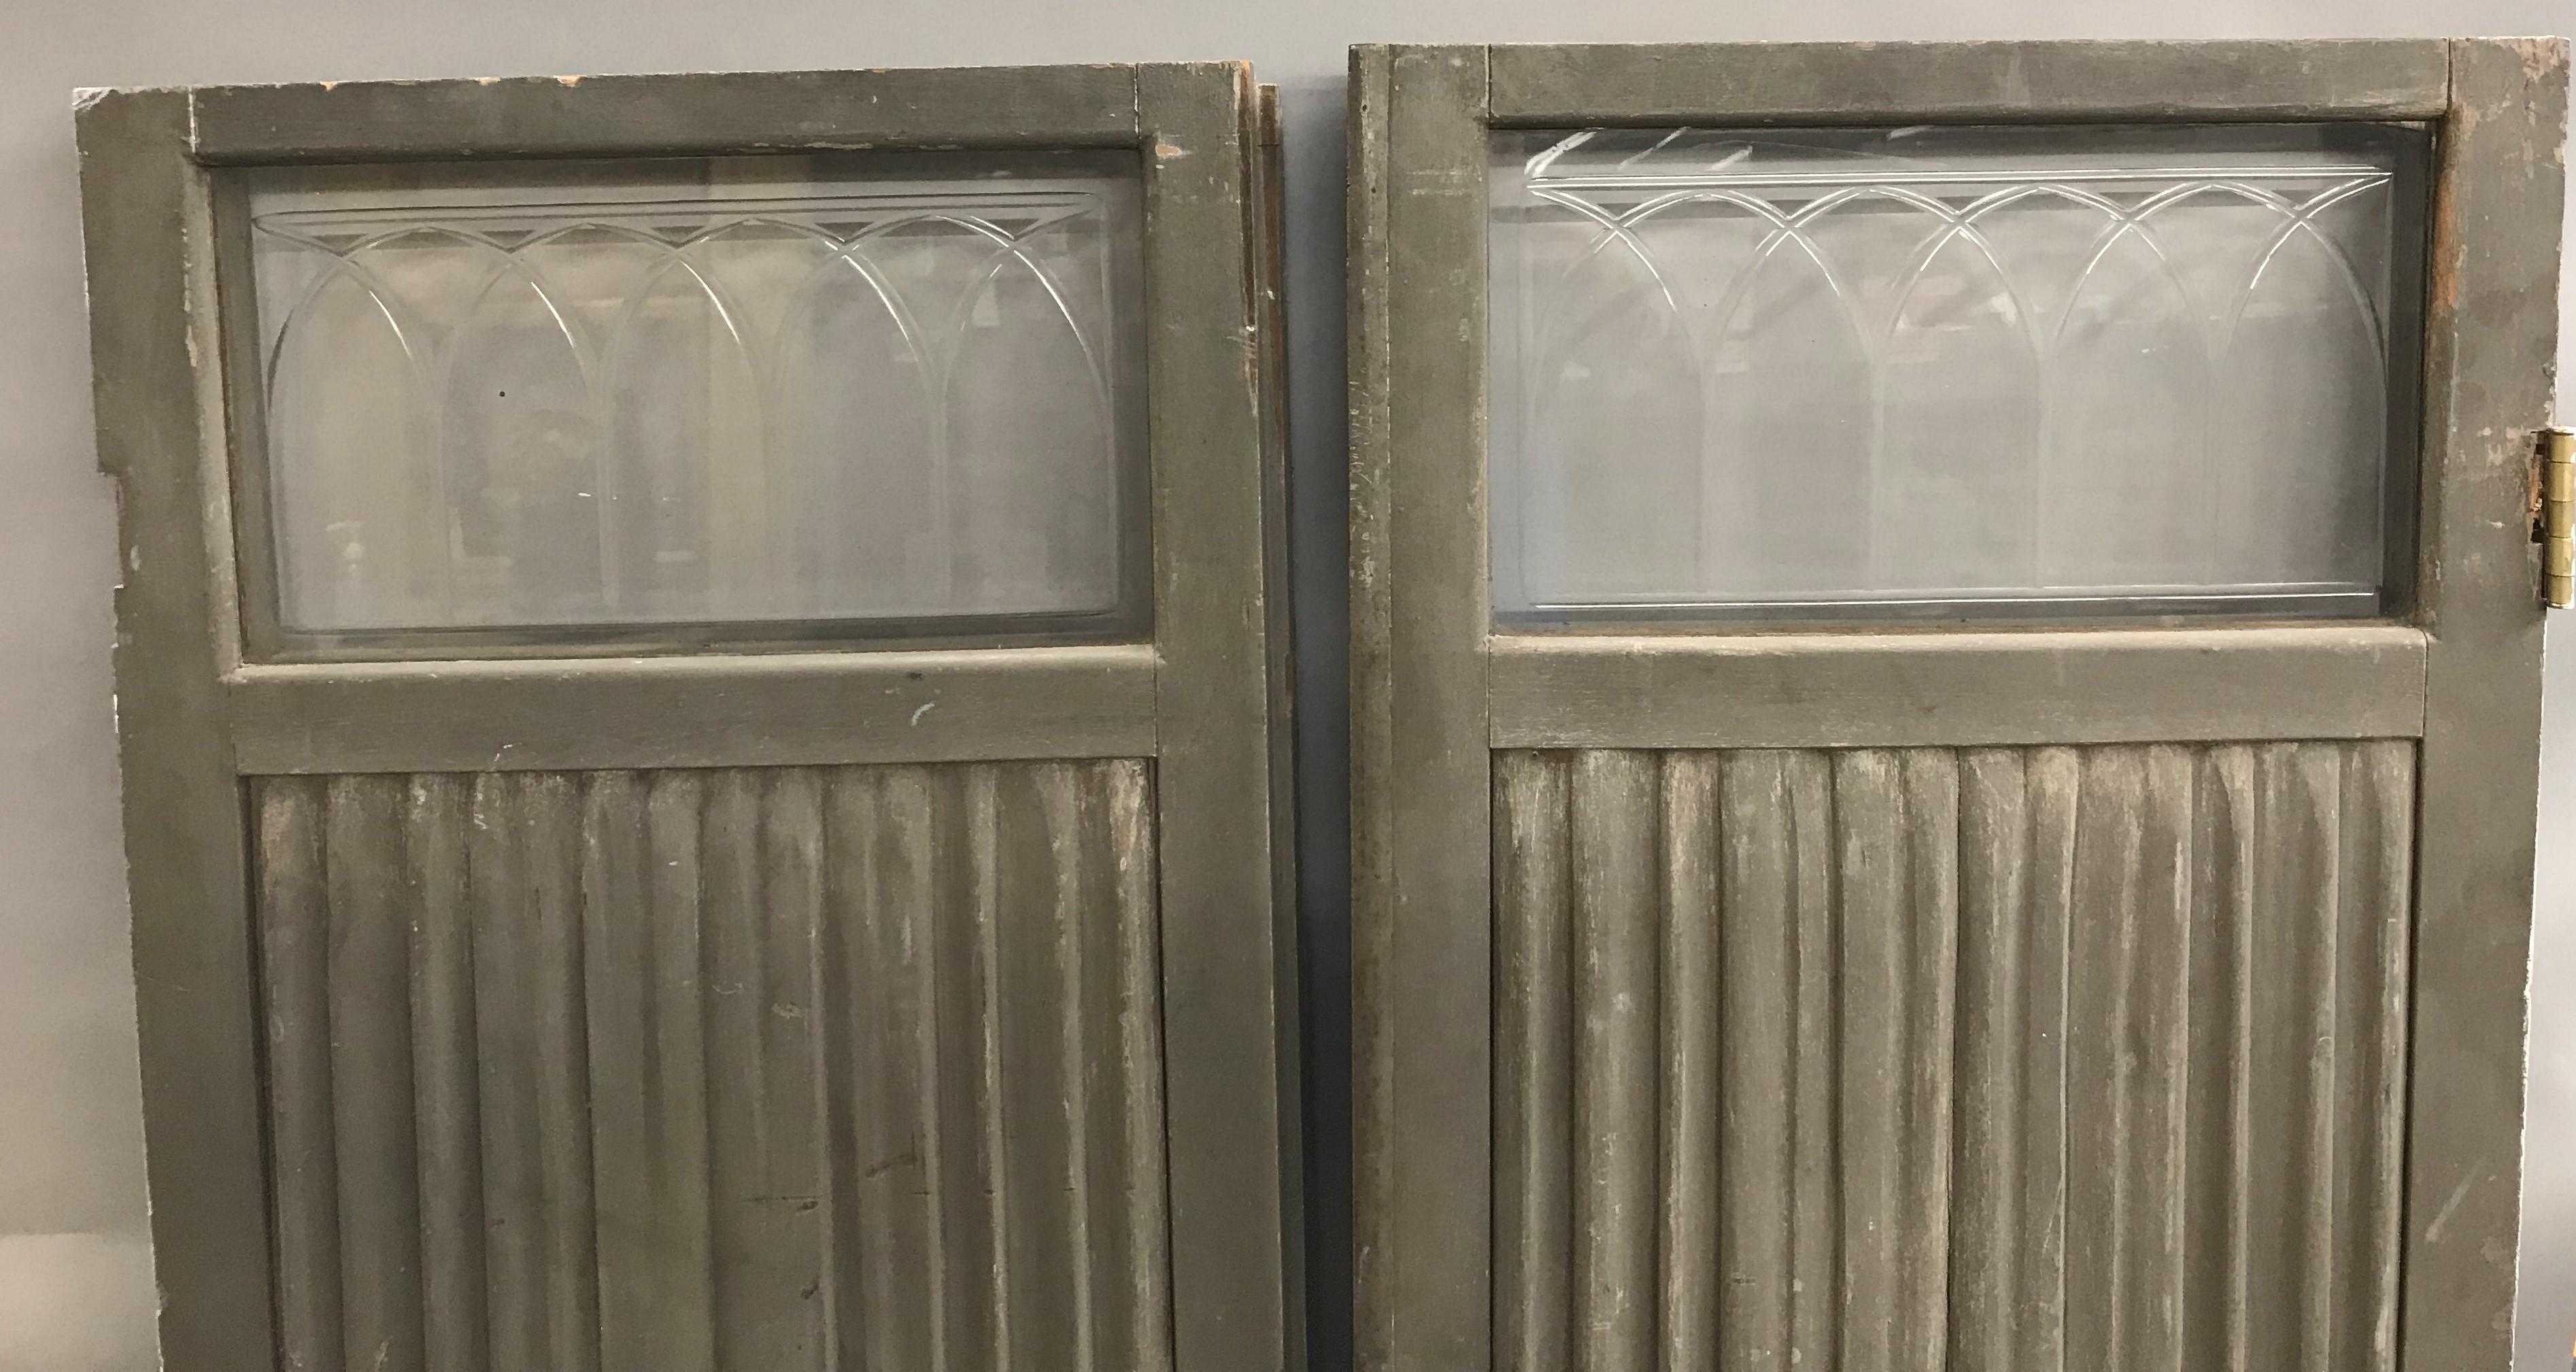 A fine pair of Victorian wooden doors from a horse-drawn hearse or funeral carriage with rectangle glass transoms at the top of each, featuring relief drapery carvings on each in old gray paint. The pair are probably English in origin, dating to the